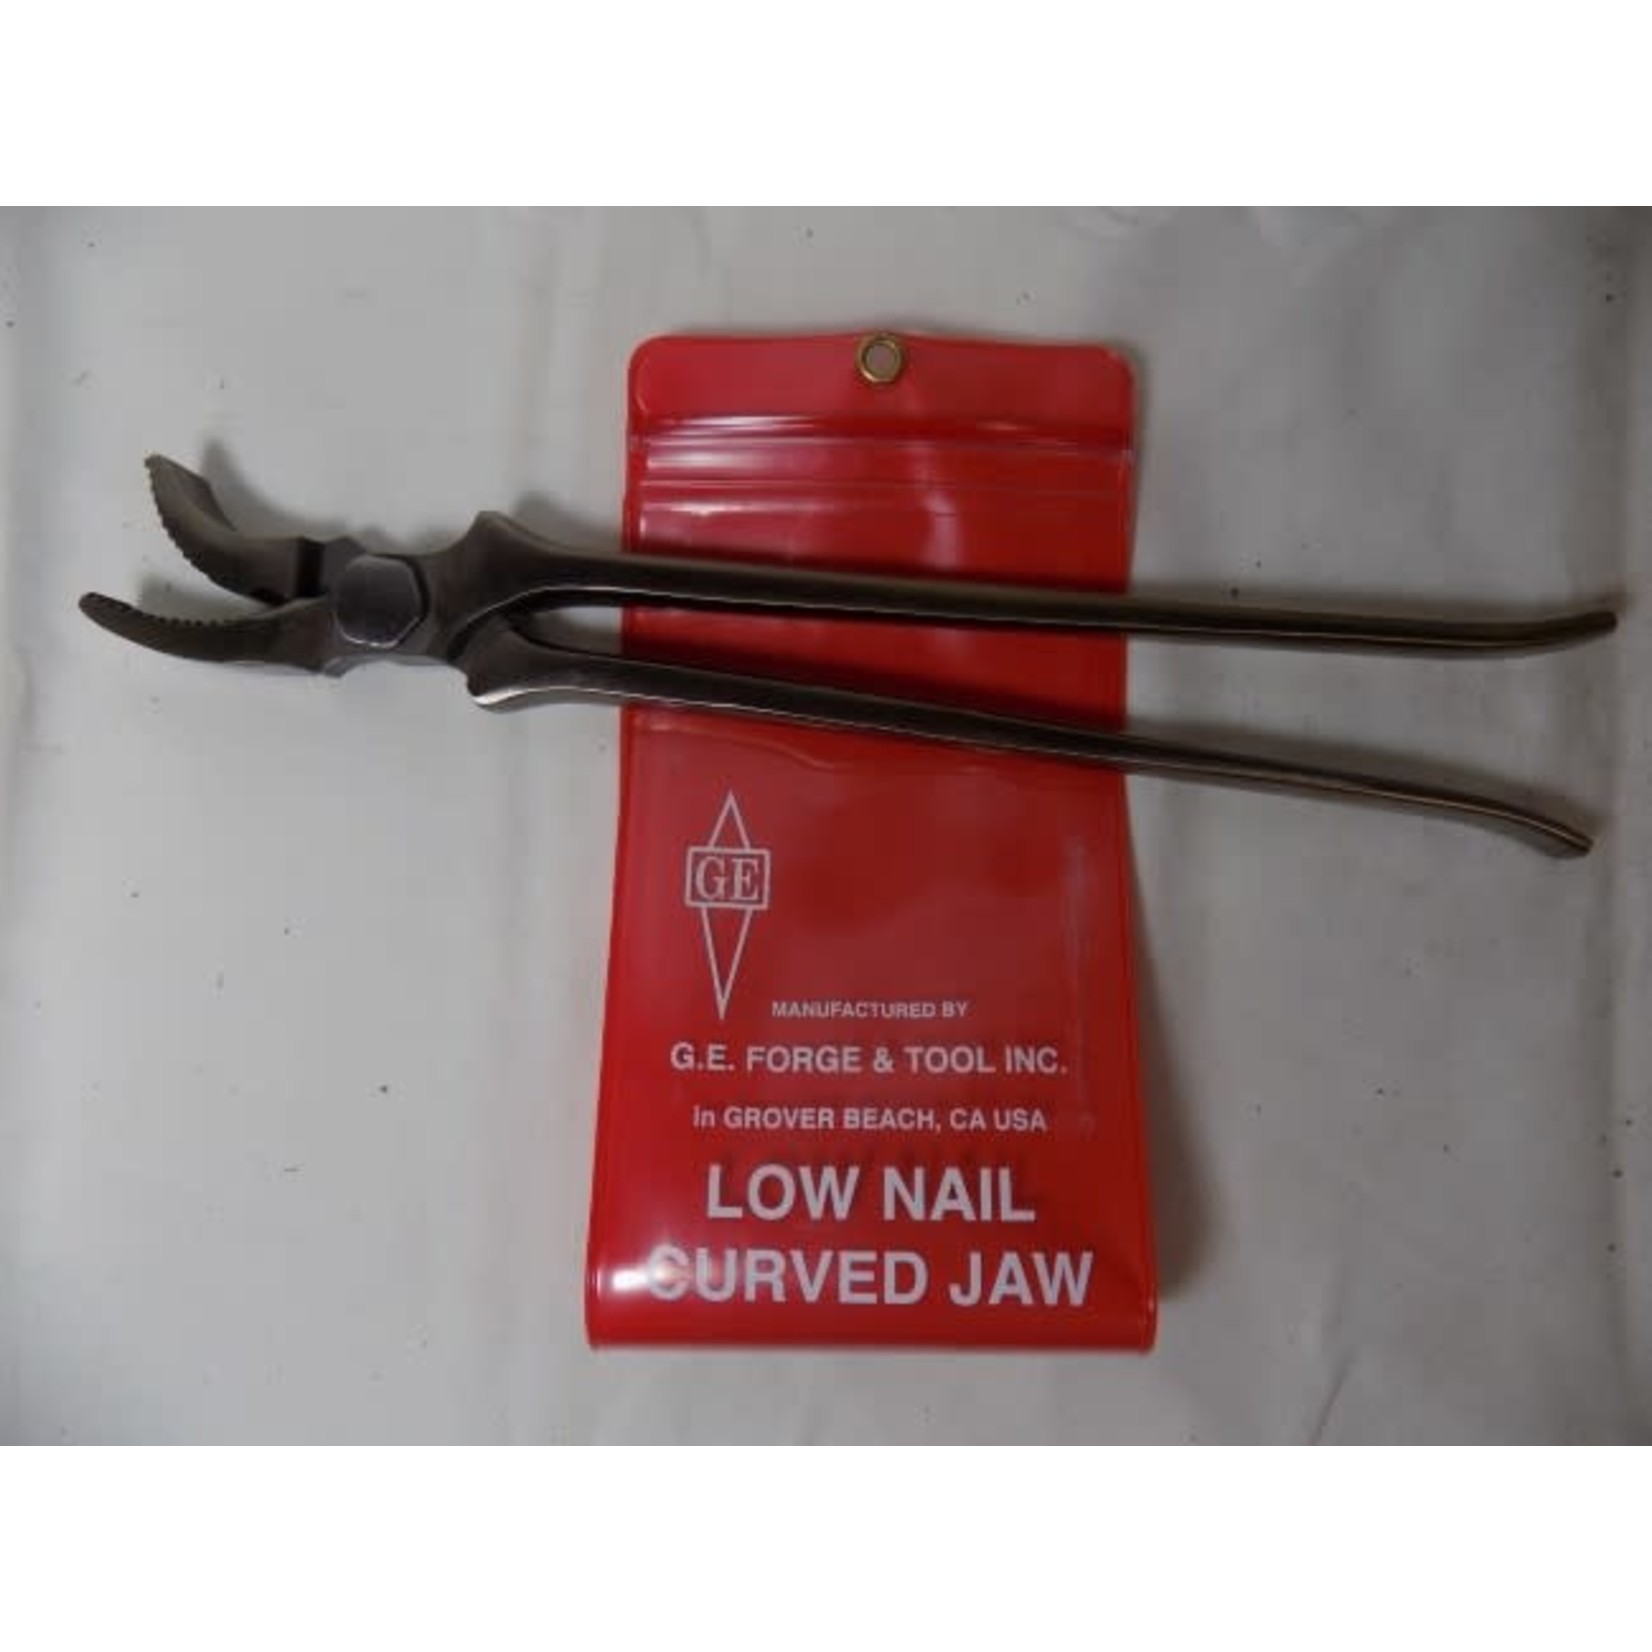 GE GE Low nail curved jaw clincher